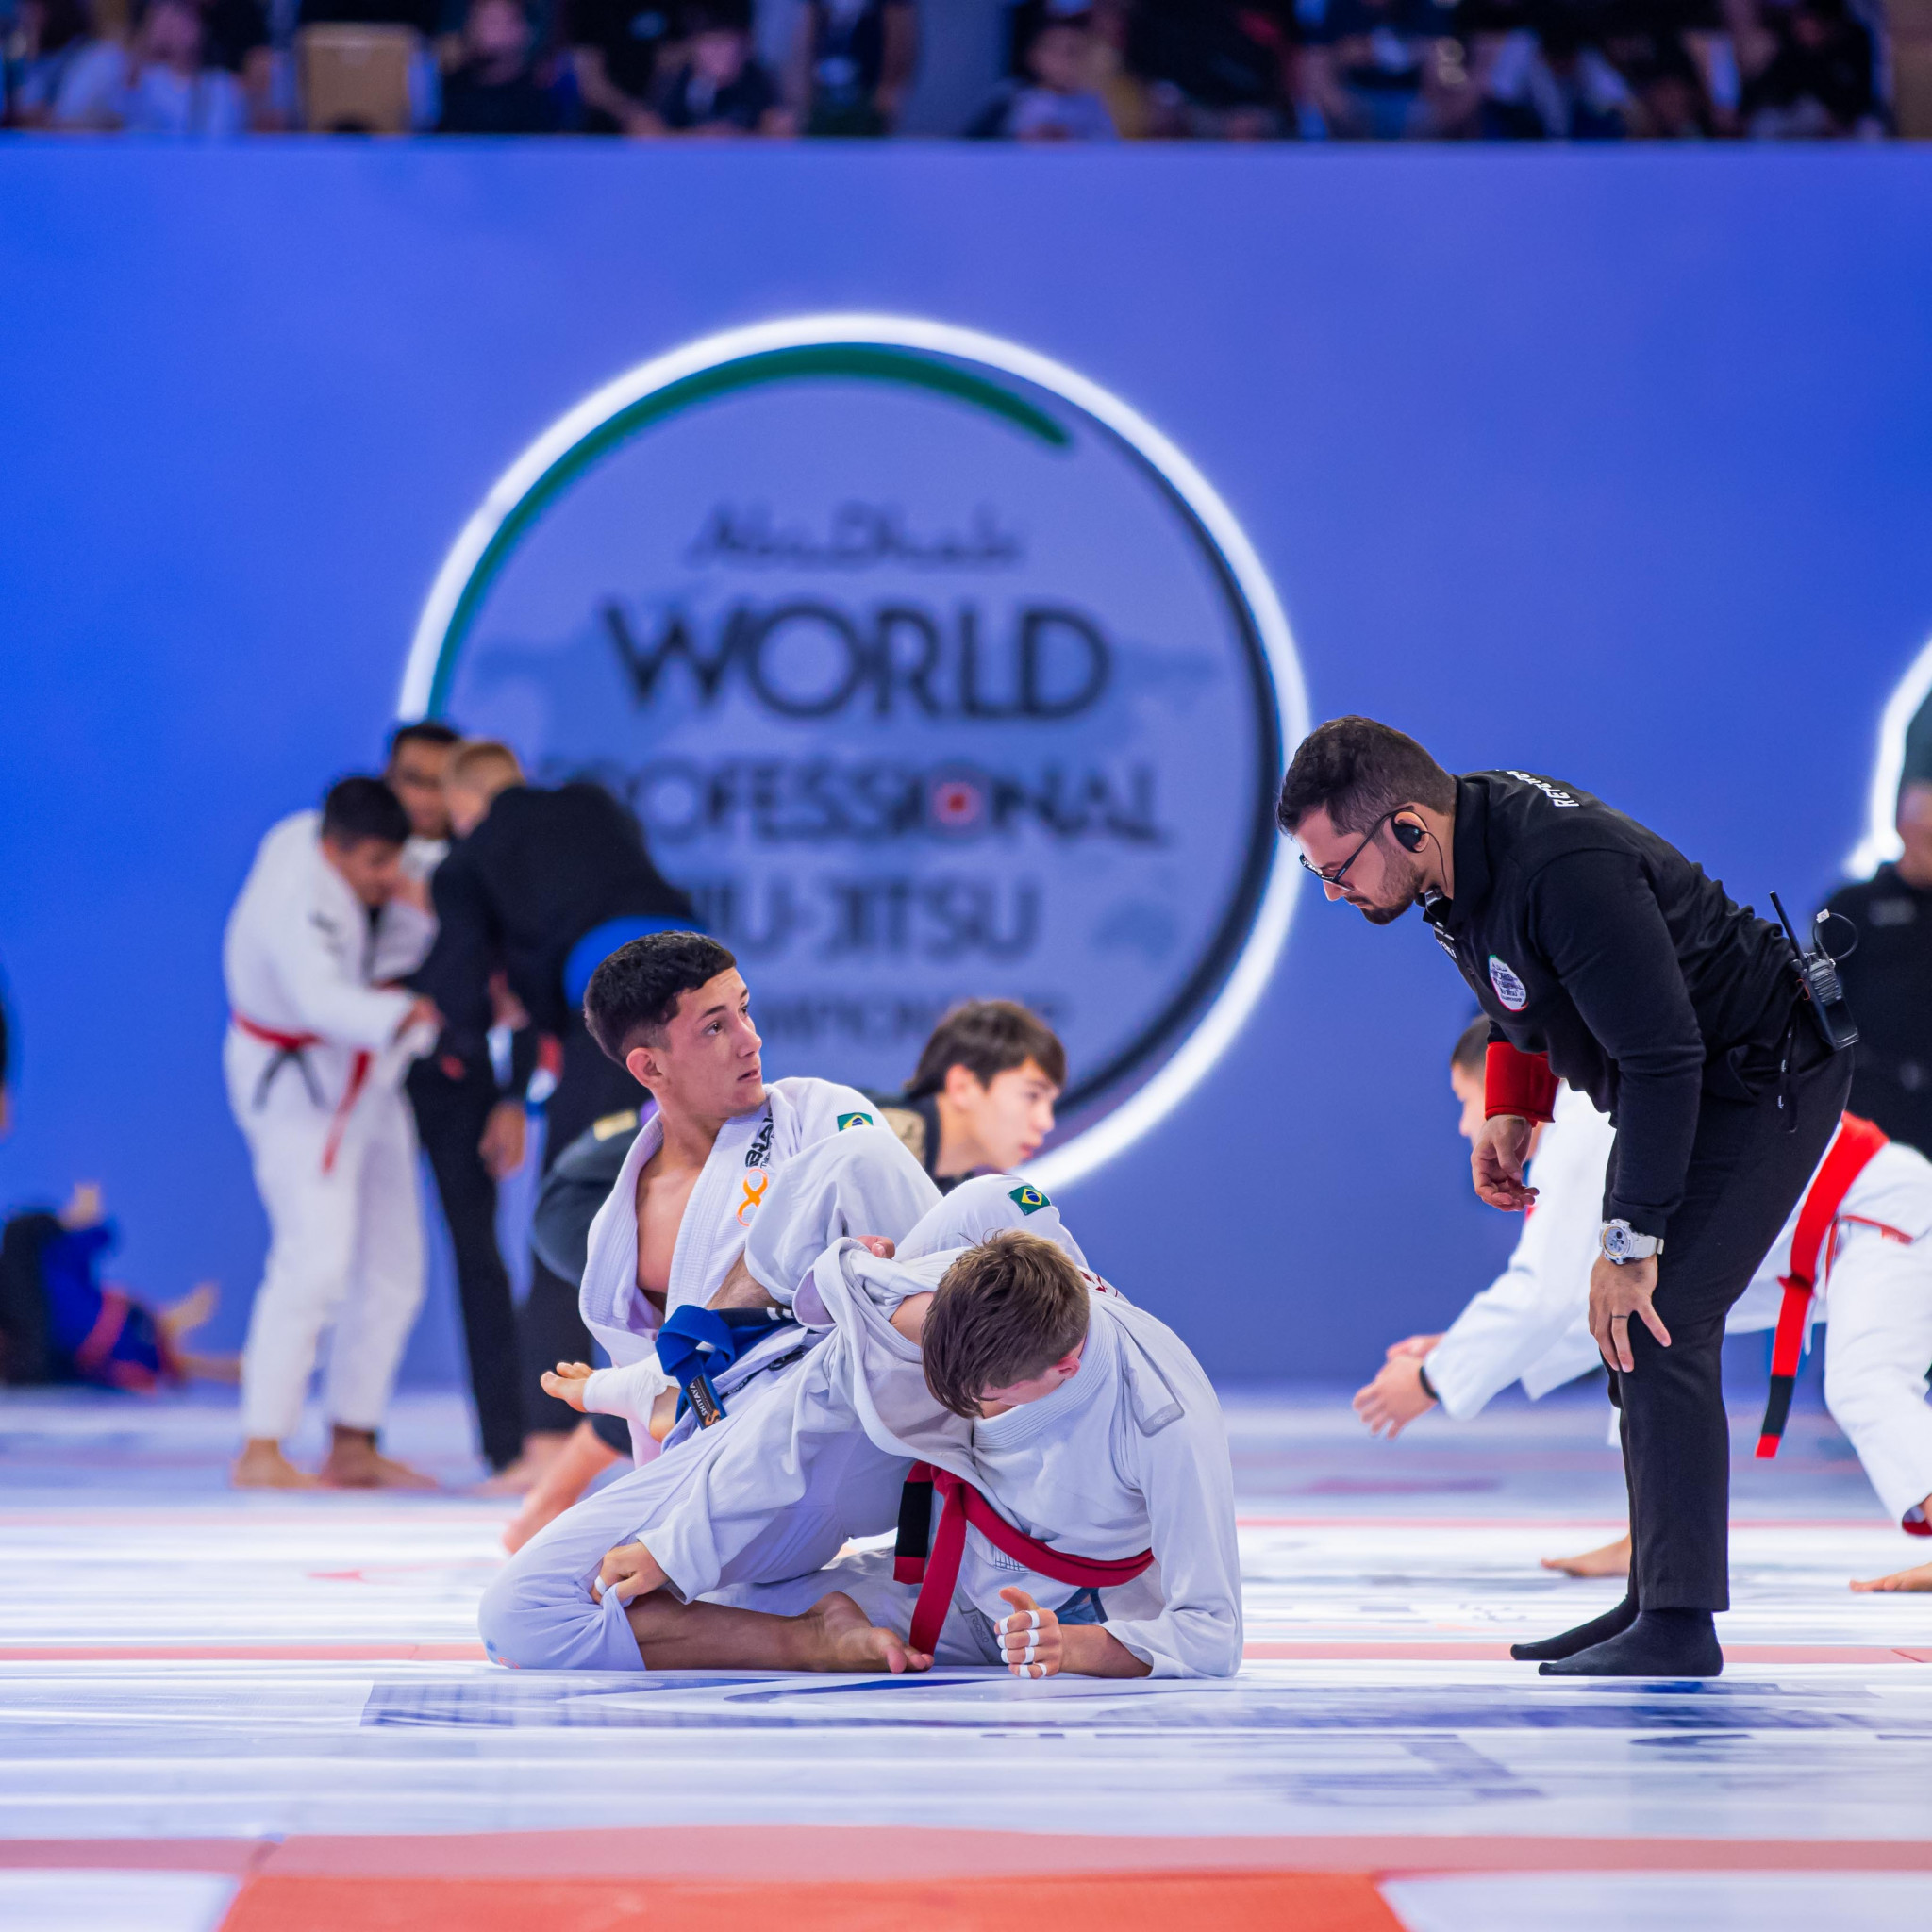 A total of 6,000 athletes from 100 countries will participate in the Abu Dhabi World Professional Jiu-Jitsu Championship ©Abu Dhabi World Professional Jiu-Jitsu Championship